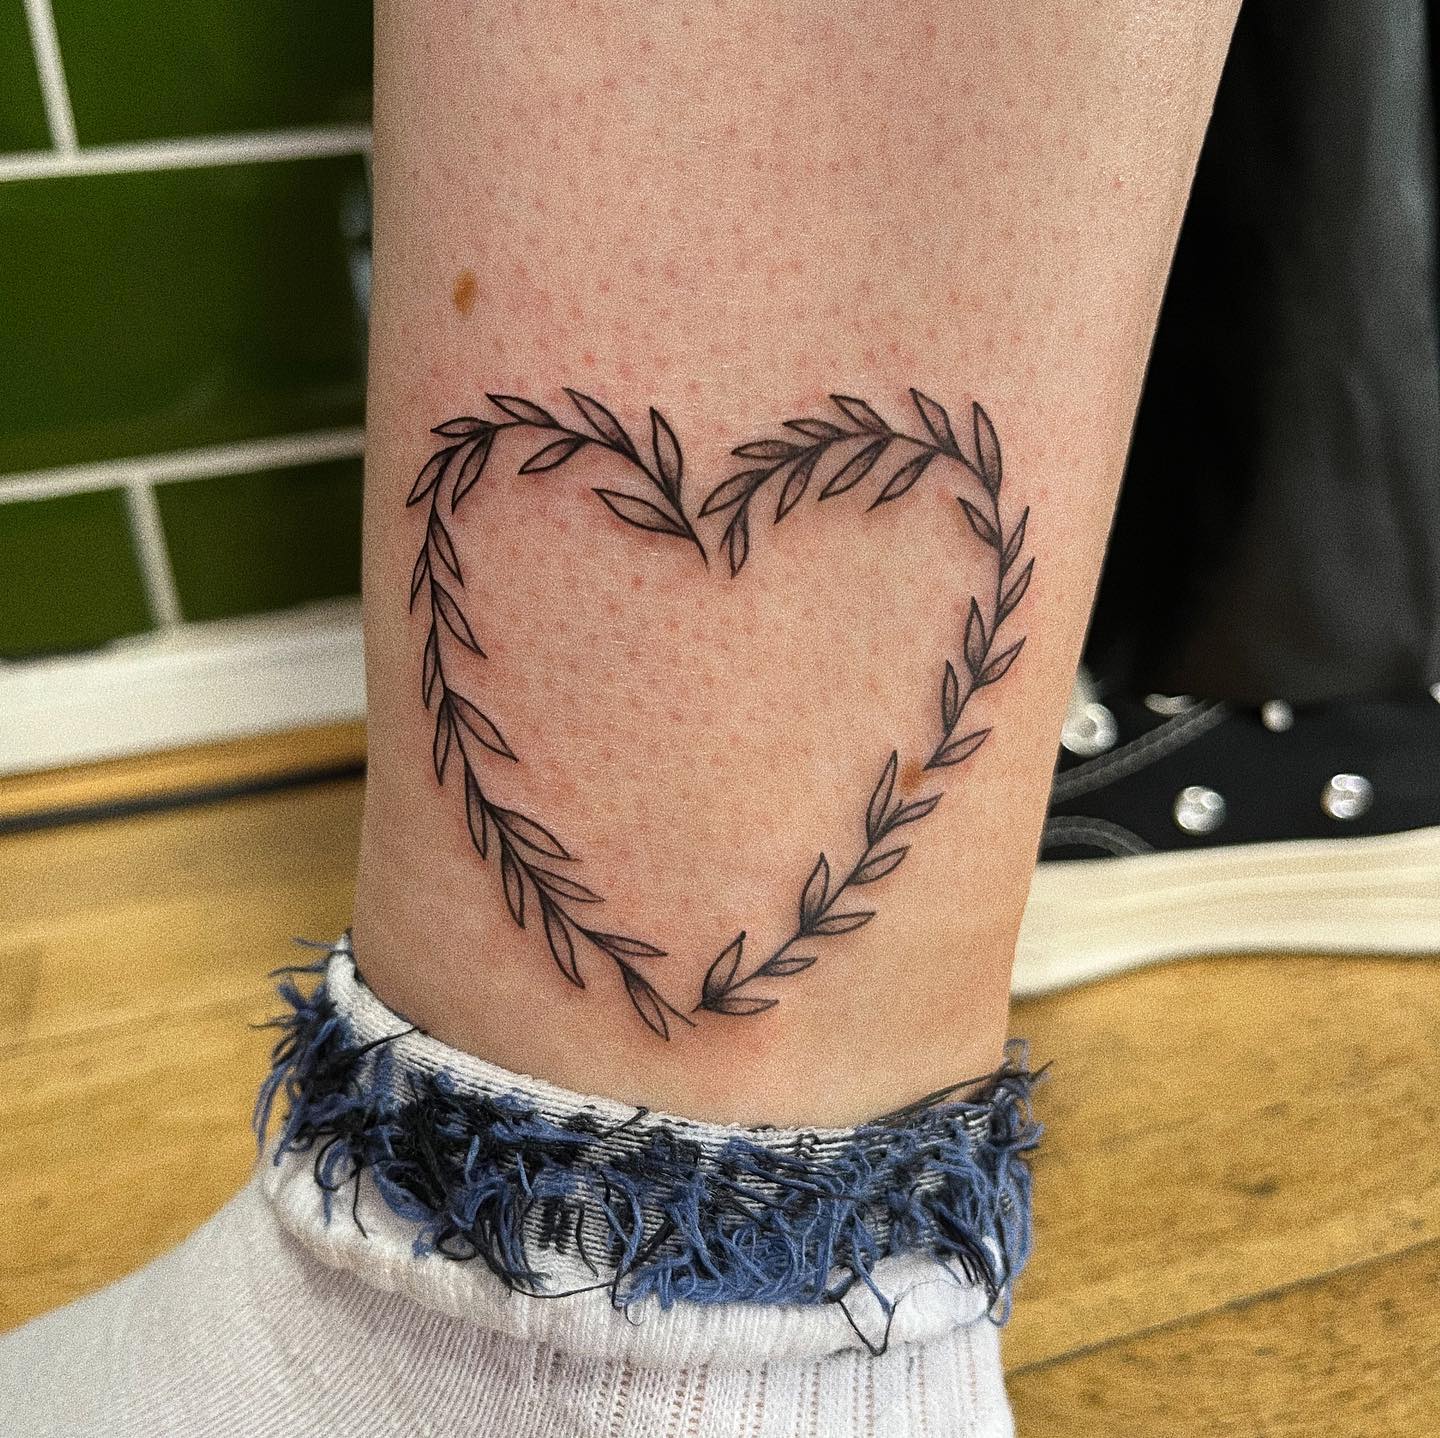 Are you in love with all types of leaves in nature? If your answer is yes, then the heart shaped leaves tattoo above is definitely for you. This will warm your heart.